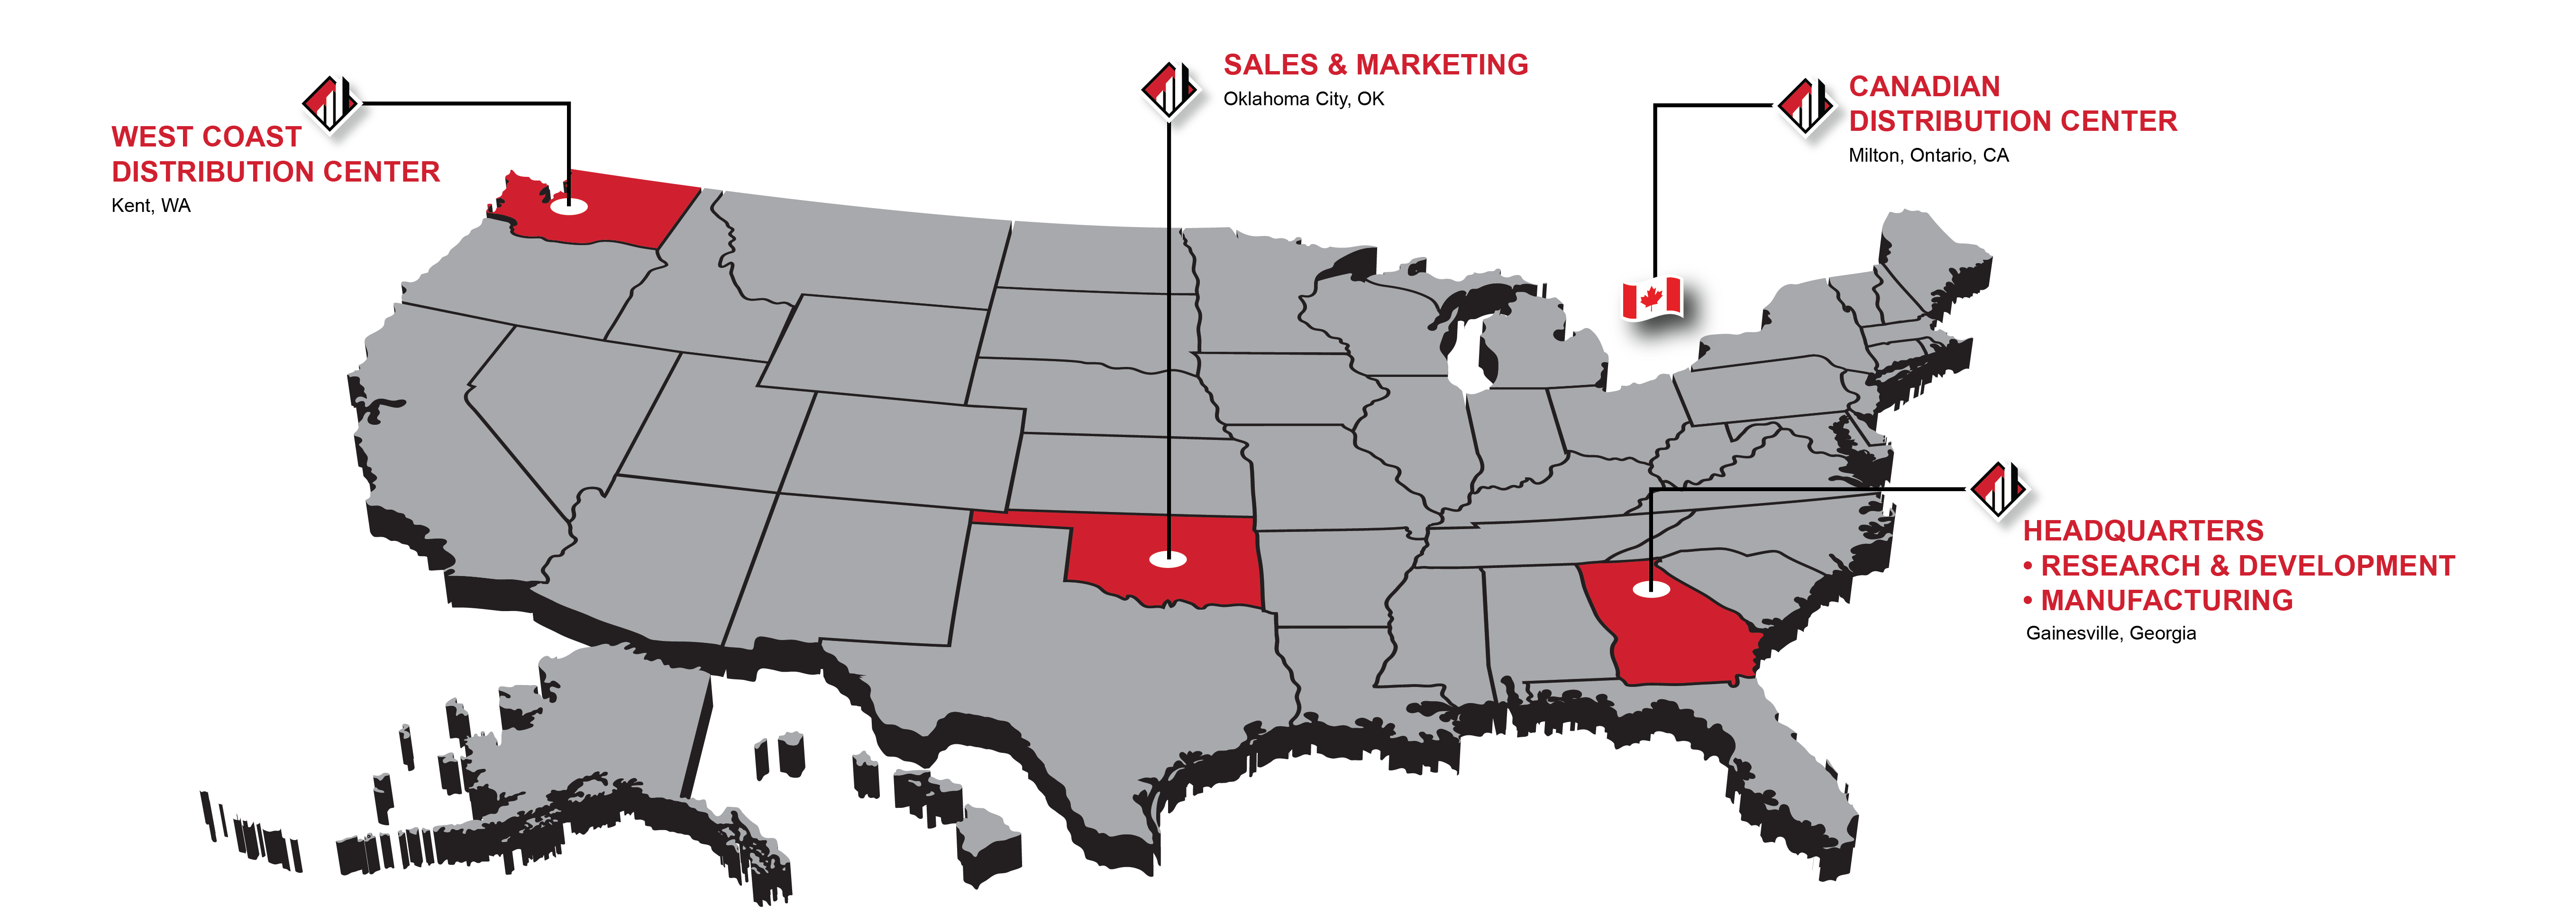 Manufacturing Locations Map West Cost Distribution Center Kenta WA, Sales & Marketing in Oklahoma City, OK Canadian Distribution Center Milton Ontario, CA Headquarters, Research & Development and Manufacturing in Gainesville, Georgia